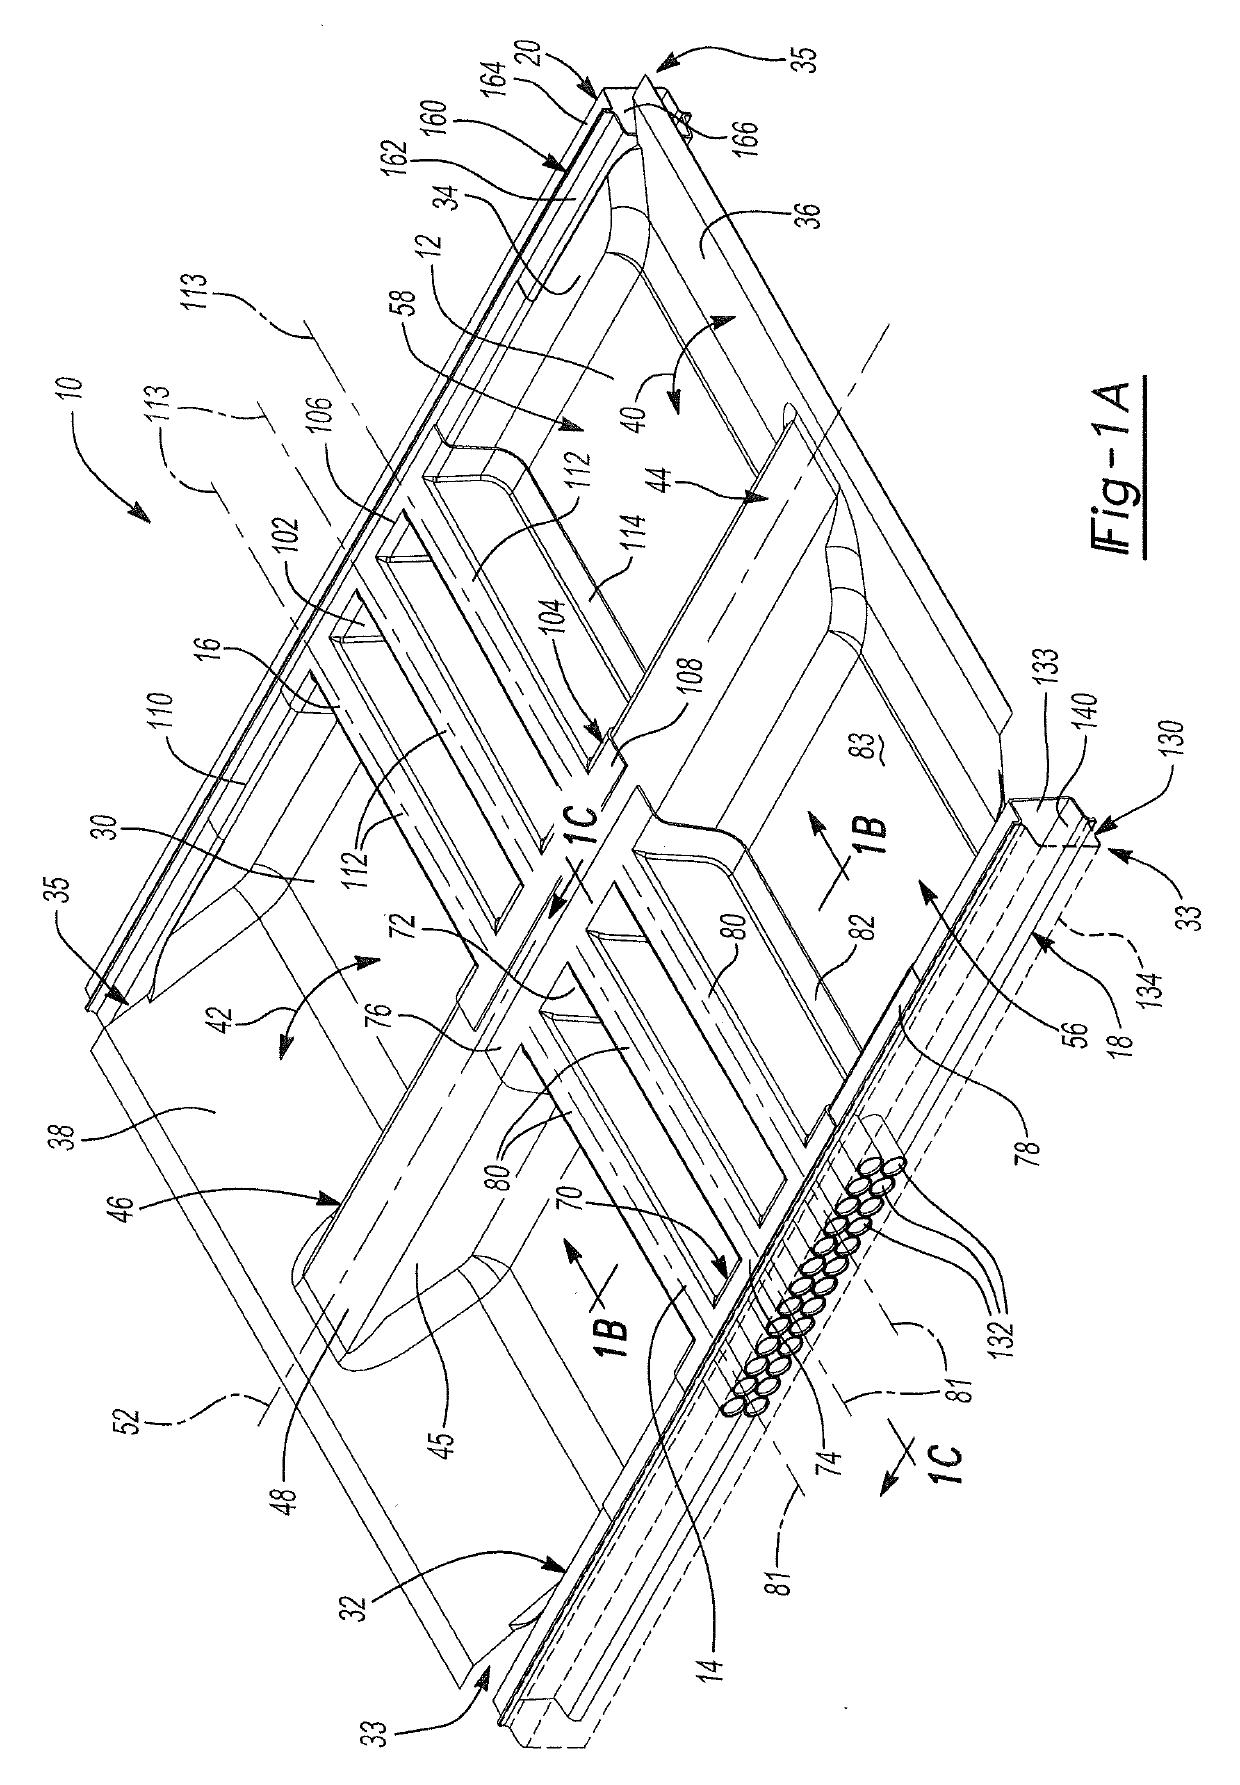 Composite underbody structure for vehicles